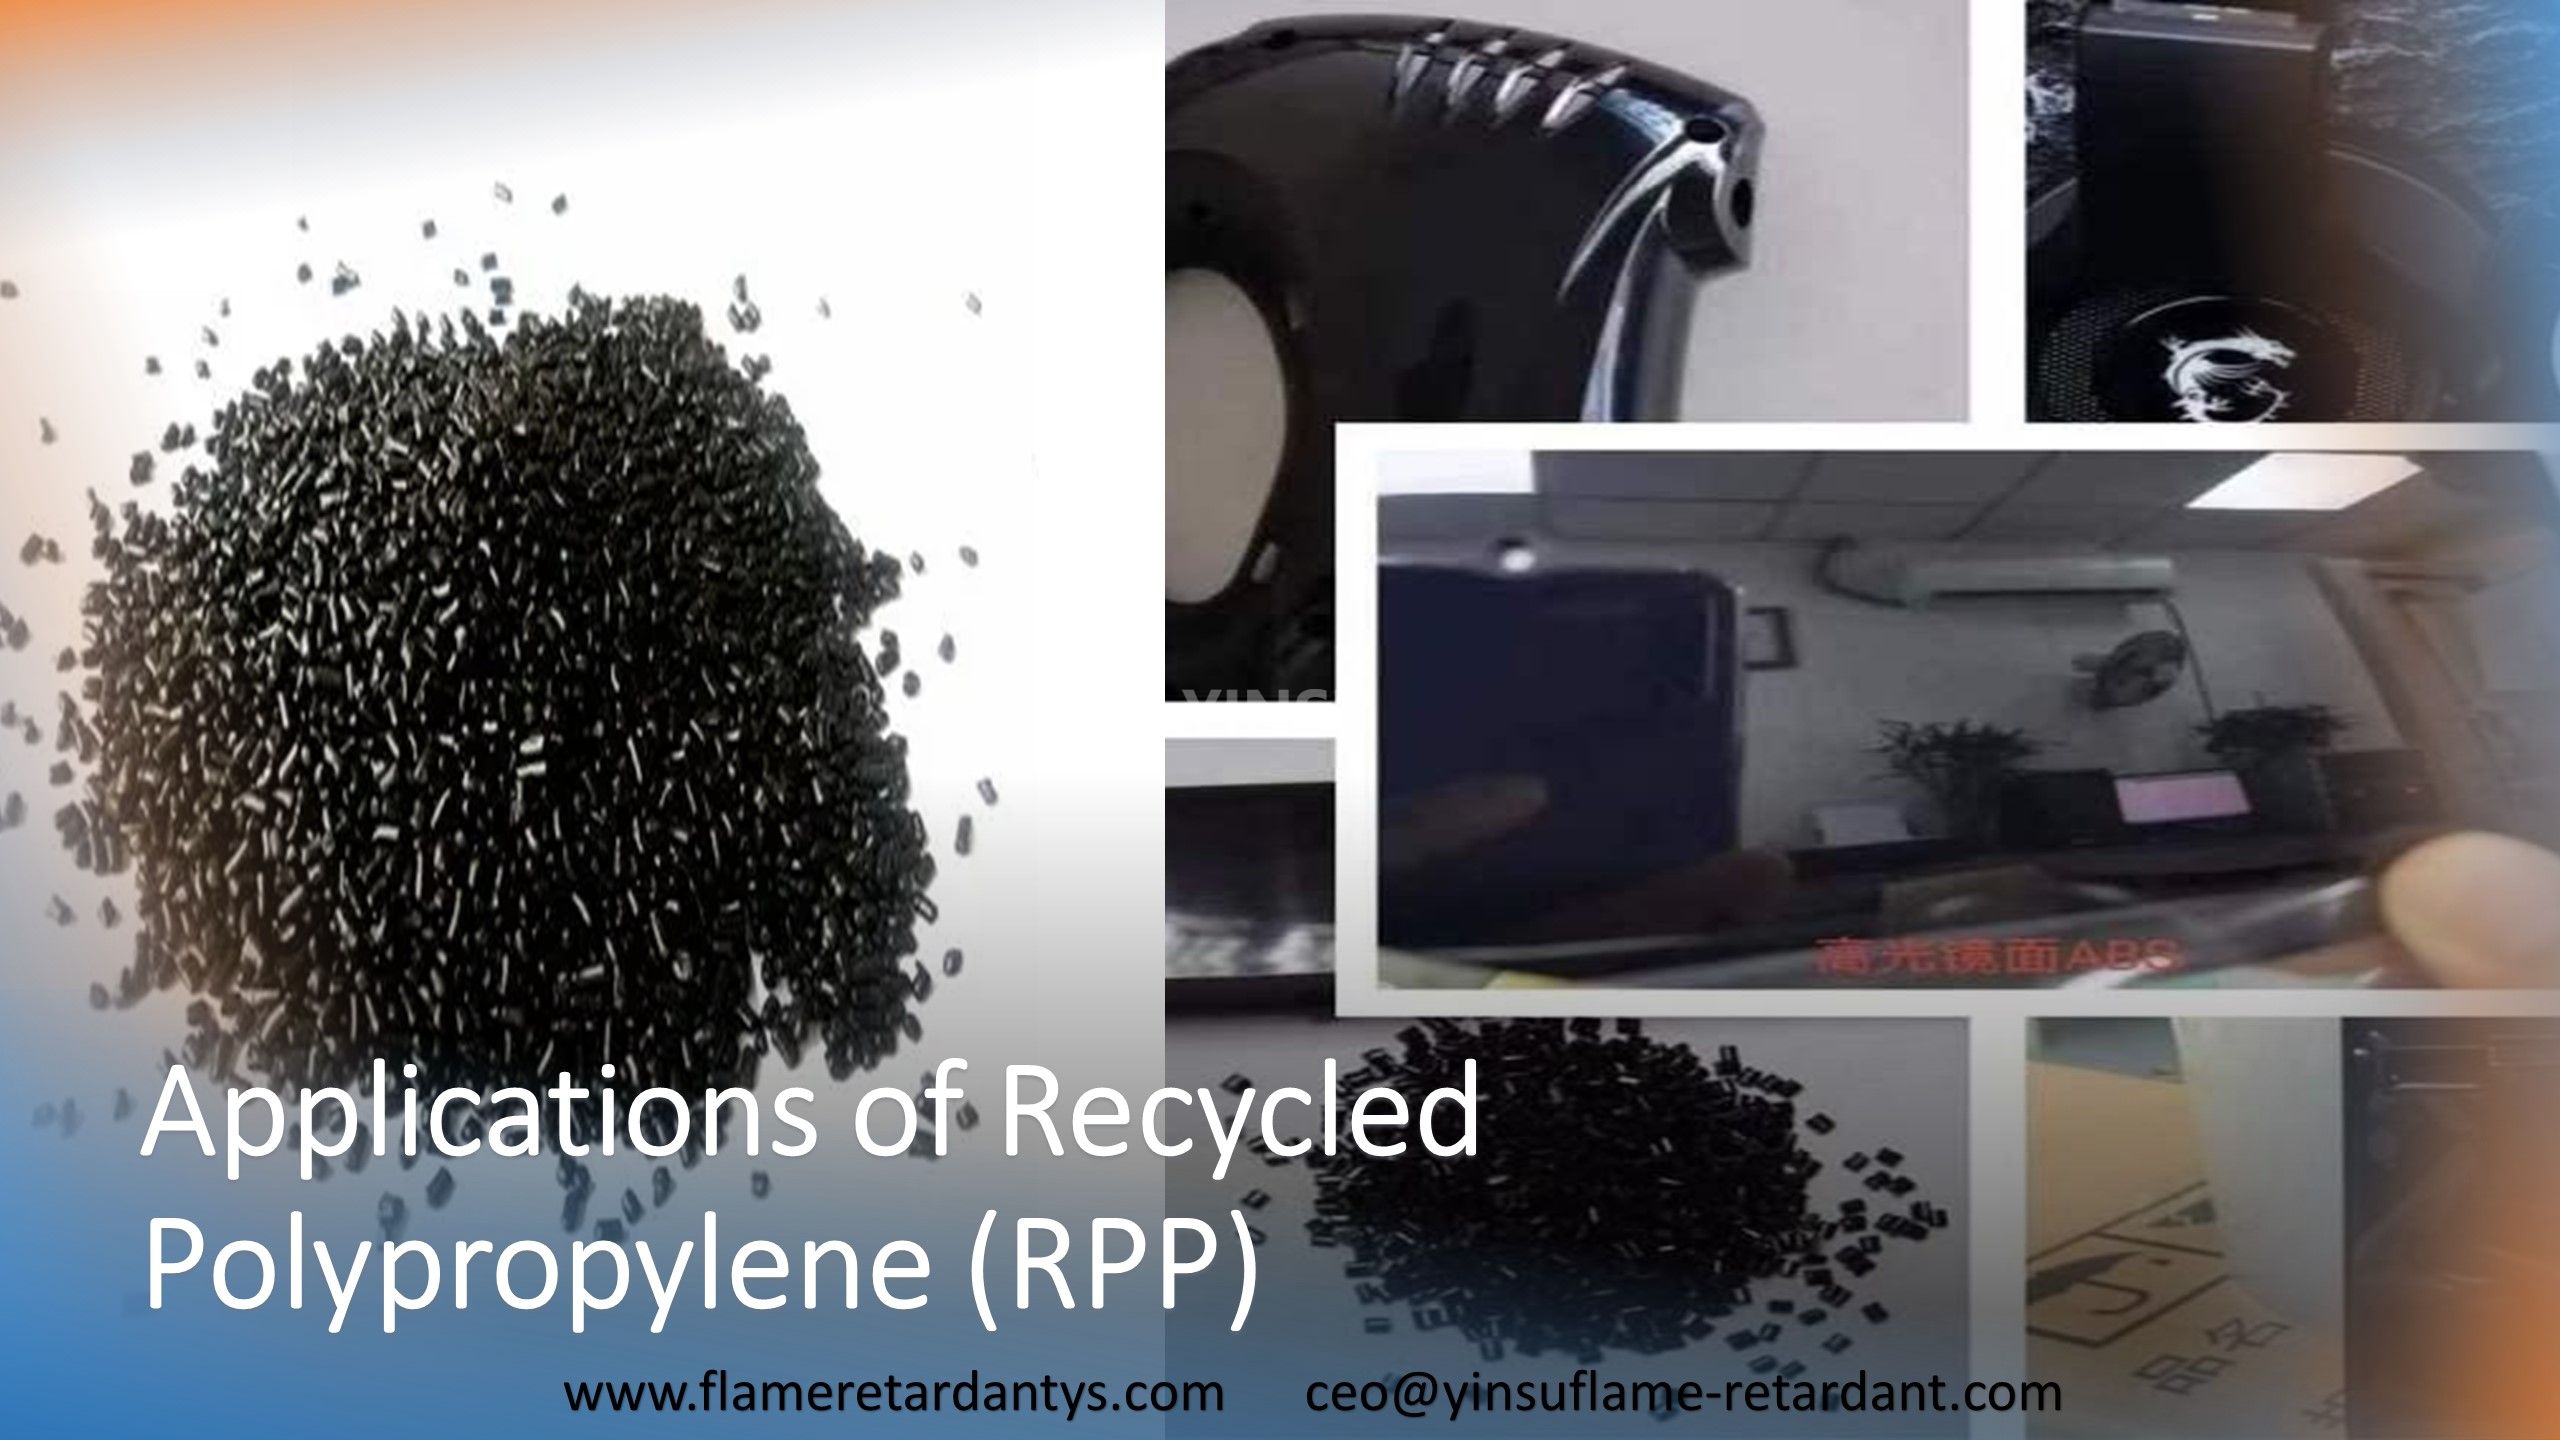 Applications of Recycled Polypropylene (RPP)